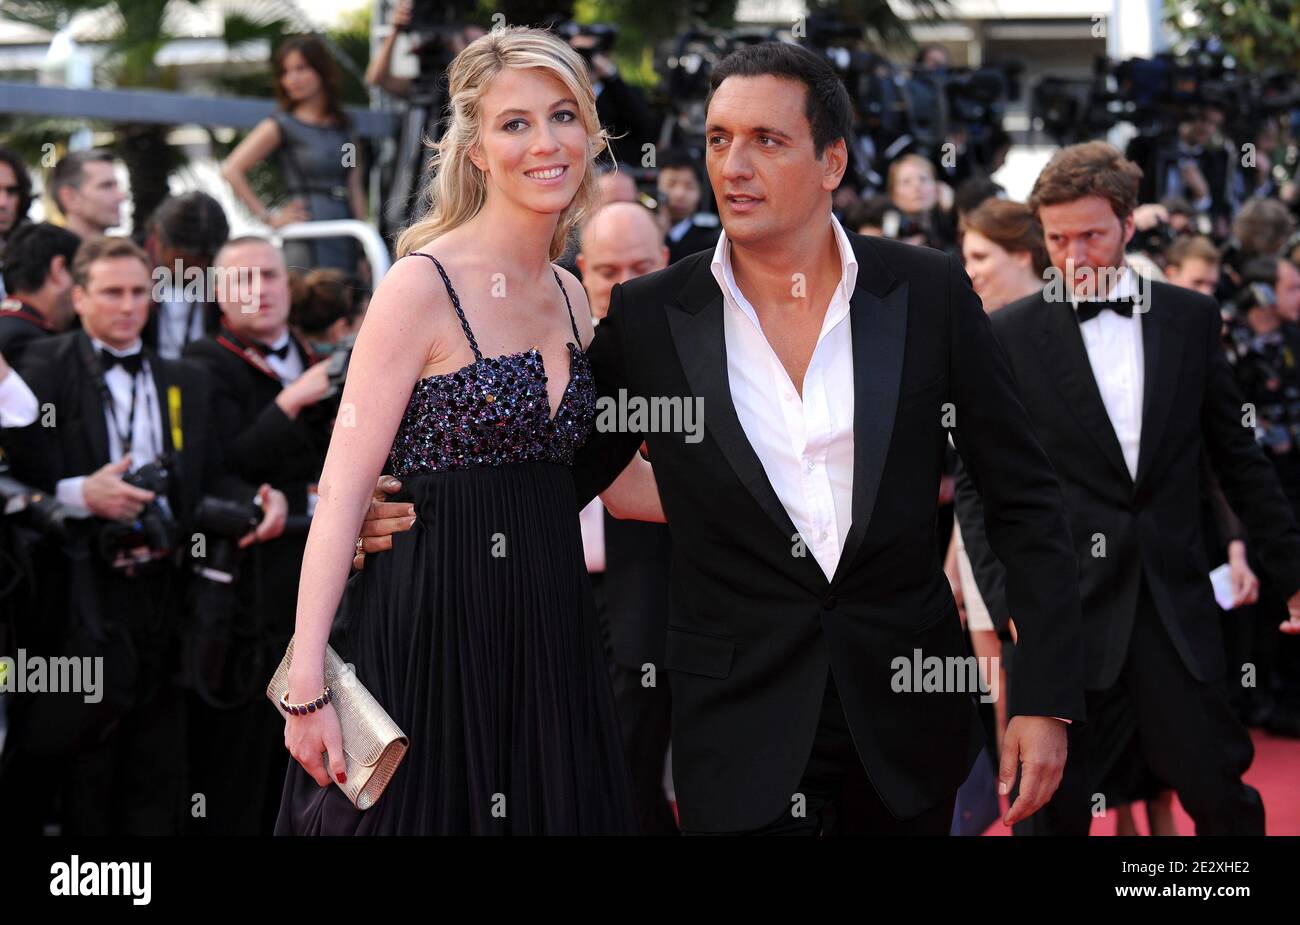 Dany Brillant and his girlfriend Nathalie Moury arriving at the premiere of  'Wall Street: Money Never Sleeps' presented out of competition during the  63rd Cannes Film Festival in Cannes, southern France on